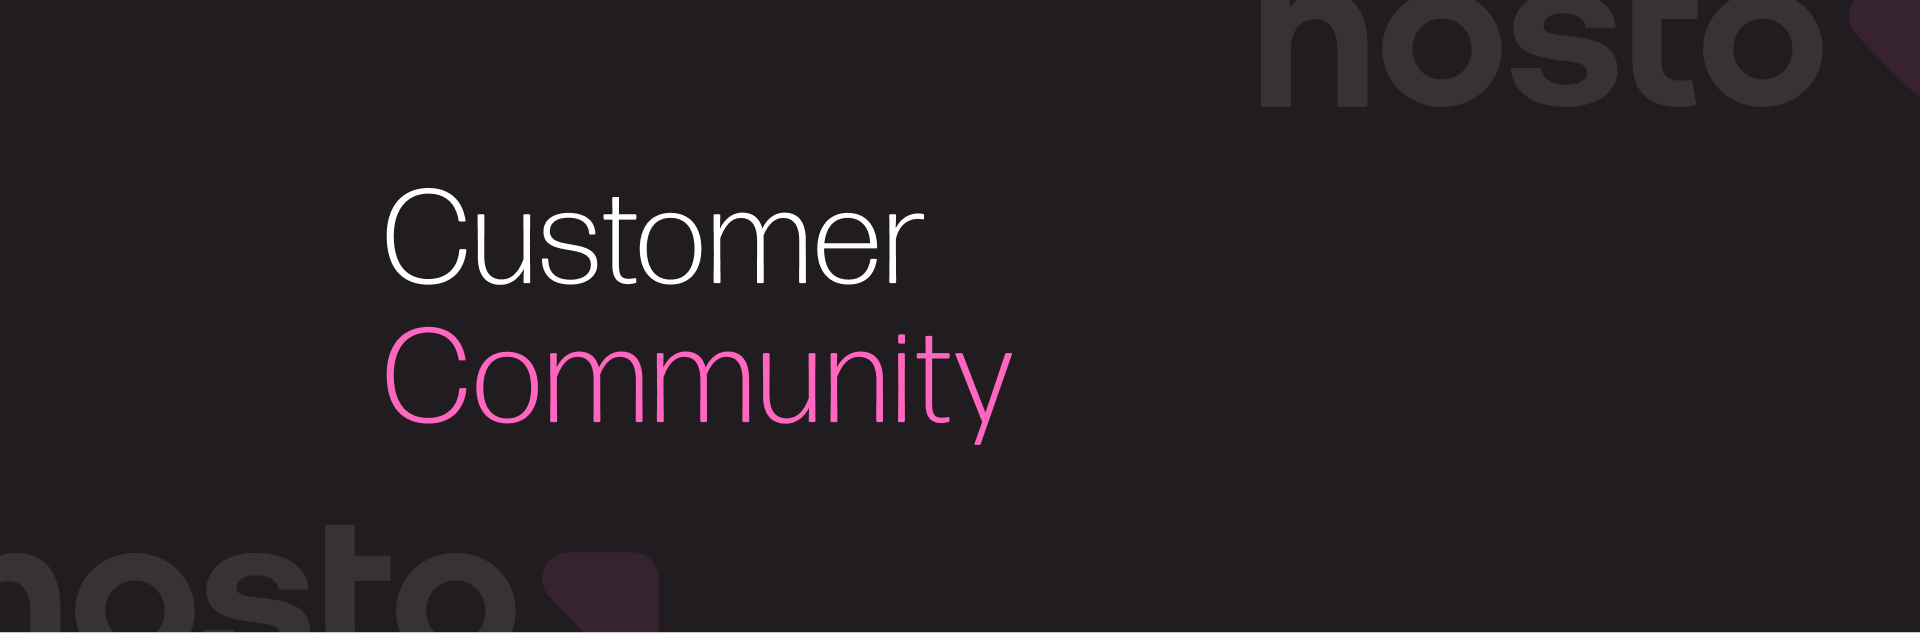 Introducing the Nosto Customer Community: Elevating our Clients’ Experience with us